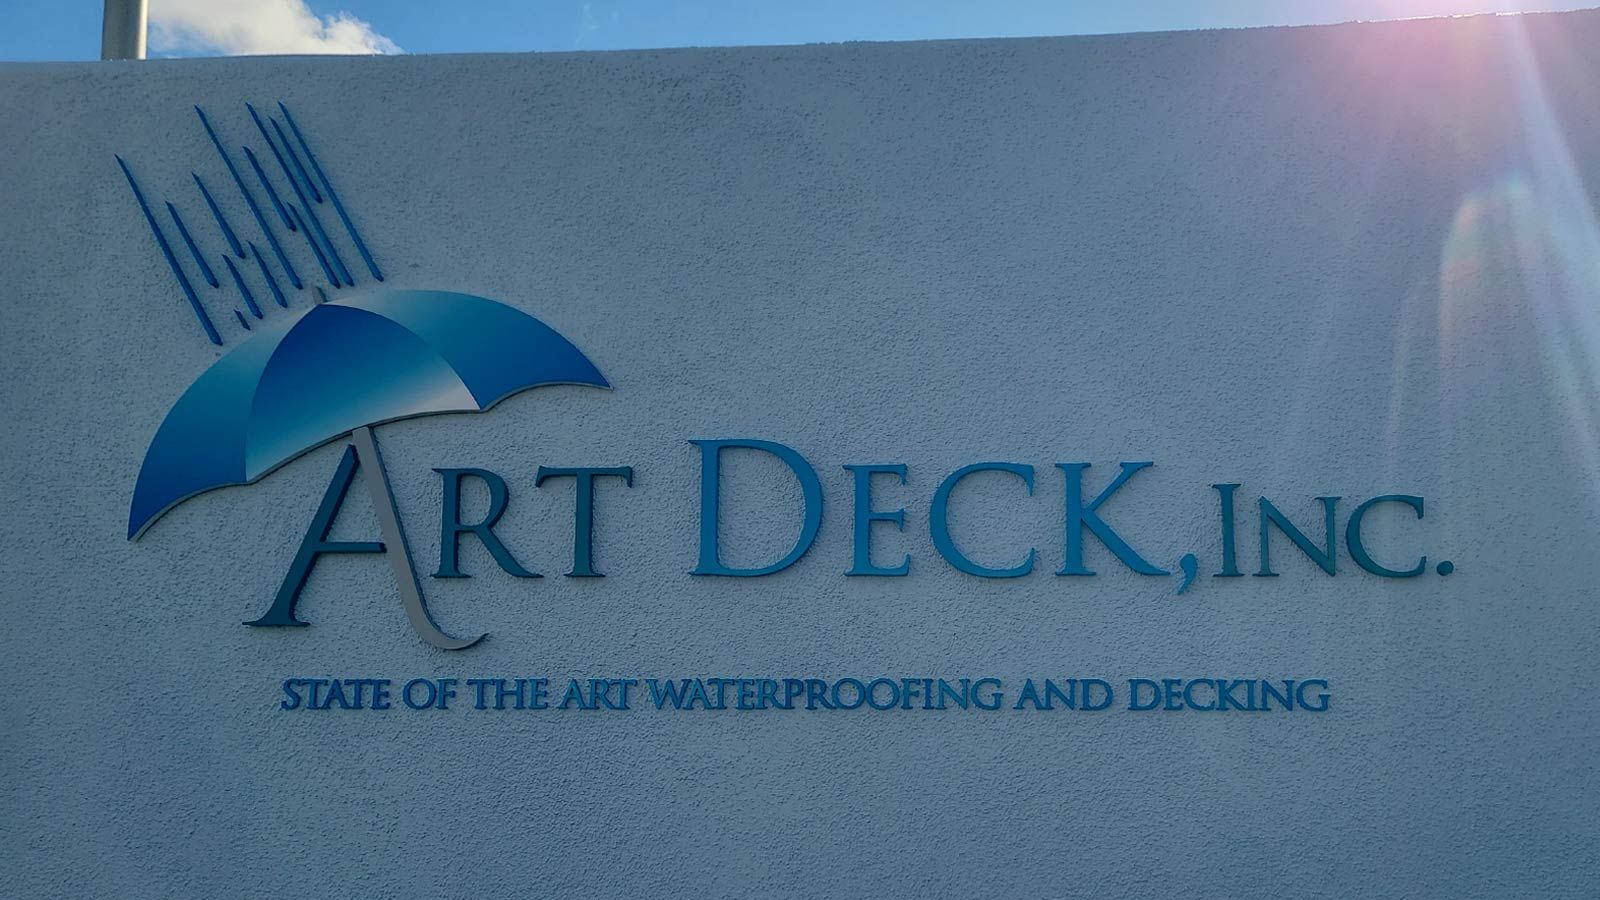 Art Deck, Inc. building sign installed on the facade